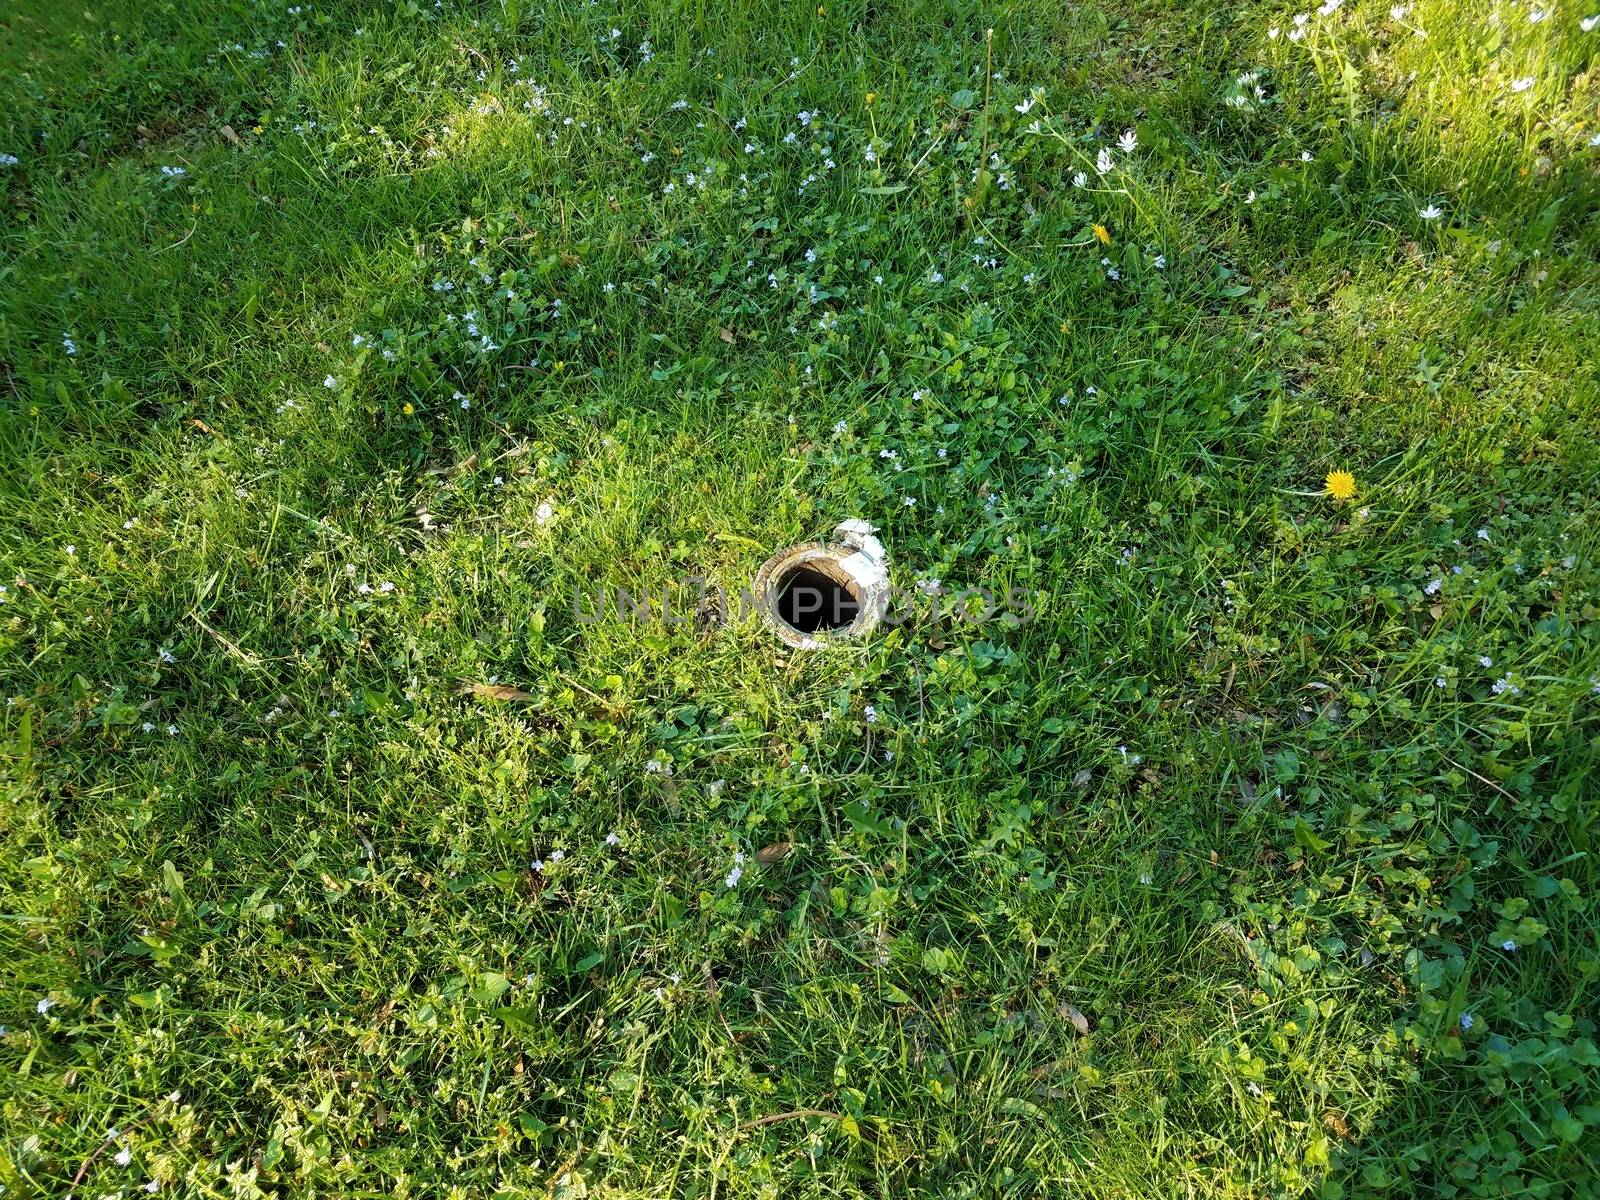 hole in metal pipe in green grass or lawn by stockphotofan1